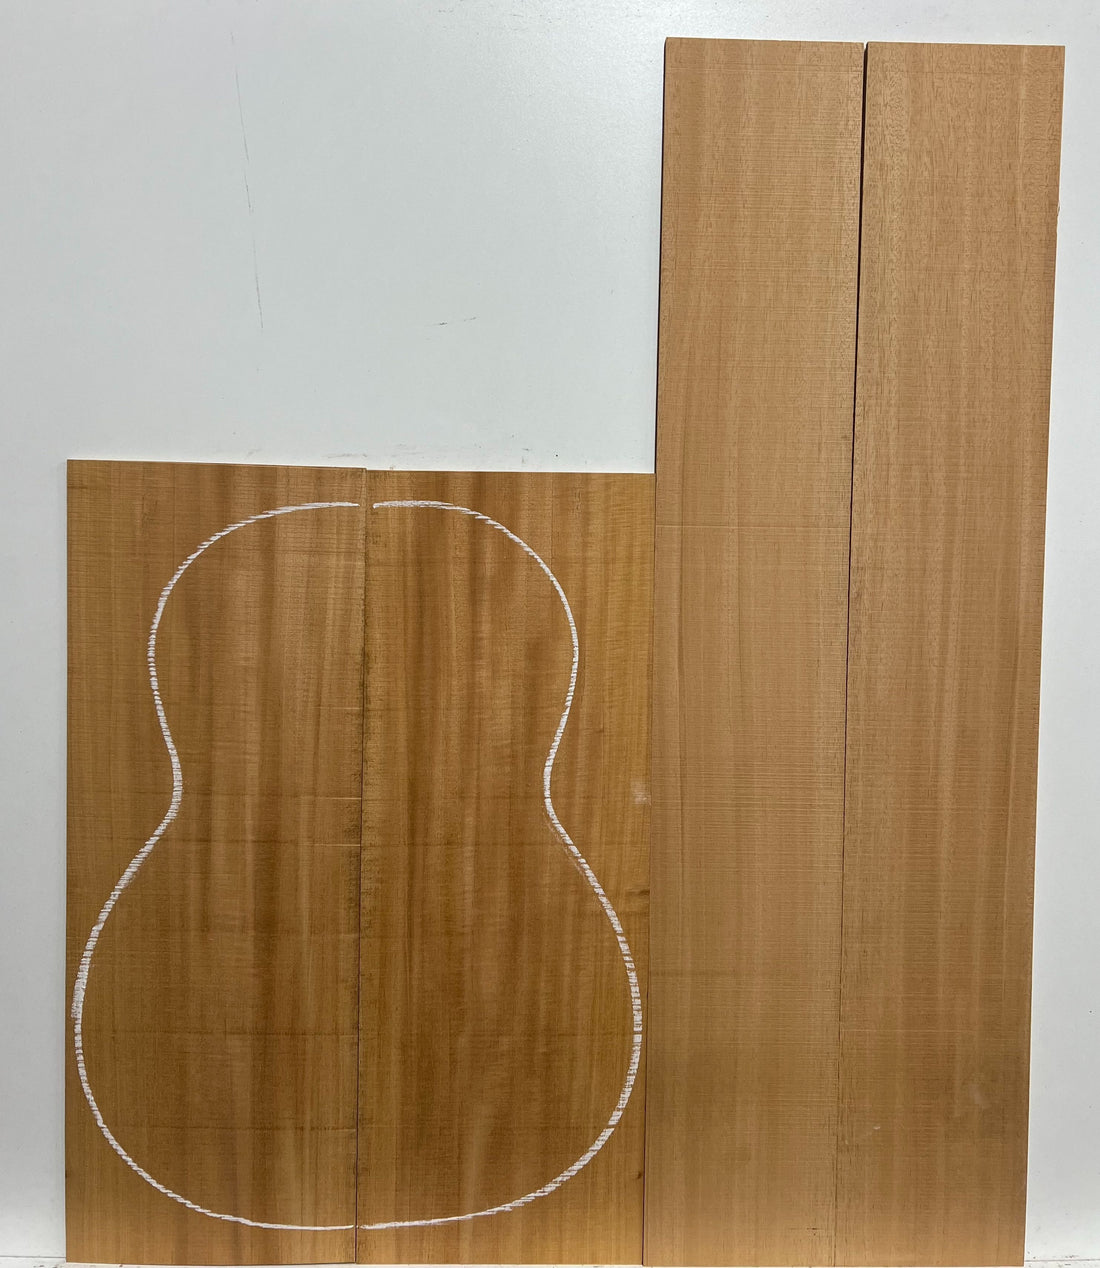 Lot of 10 , Honduran Mahogany Guitar Classical Back and Side Sets - Exotic Wood Zone - Buy online Across USA 